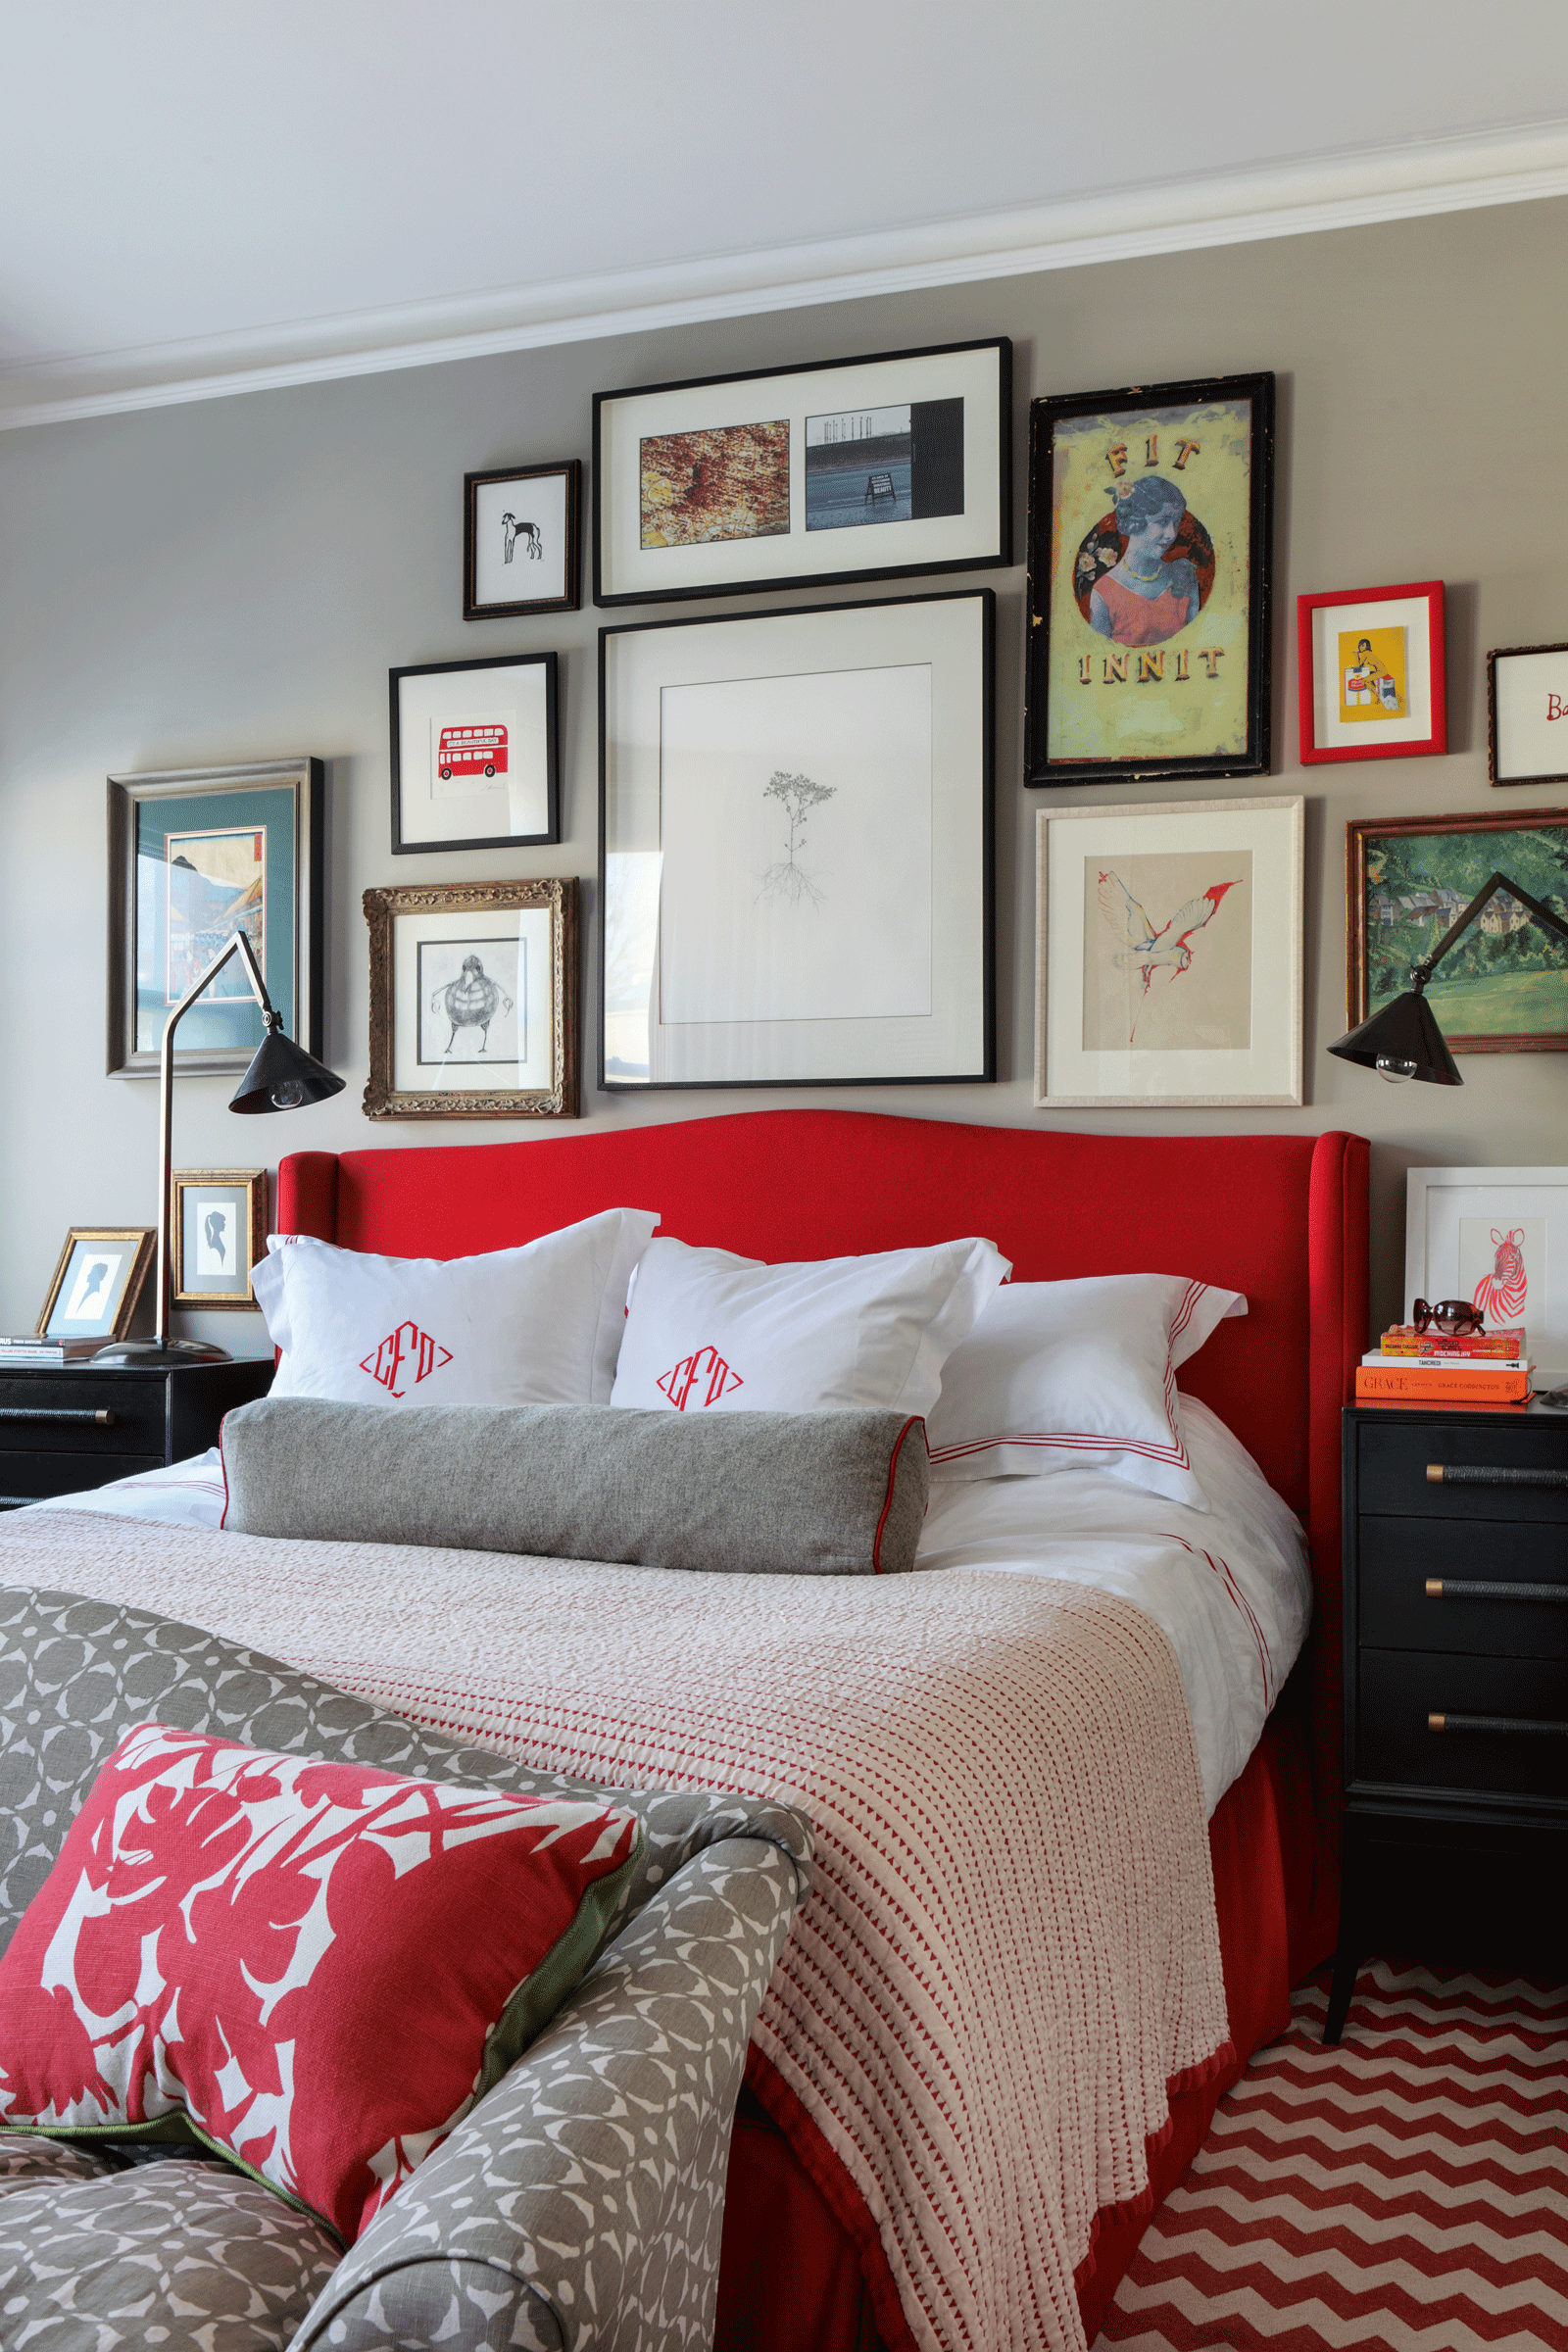 guest bedroom by turner pocock with gallery wall and red headboard